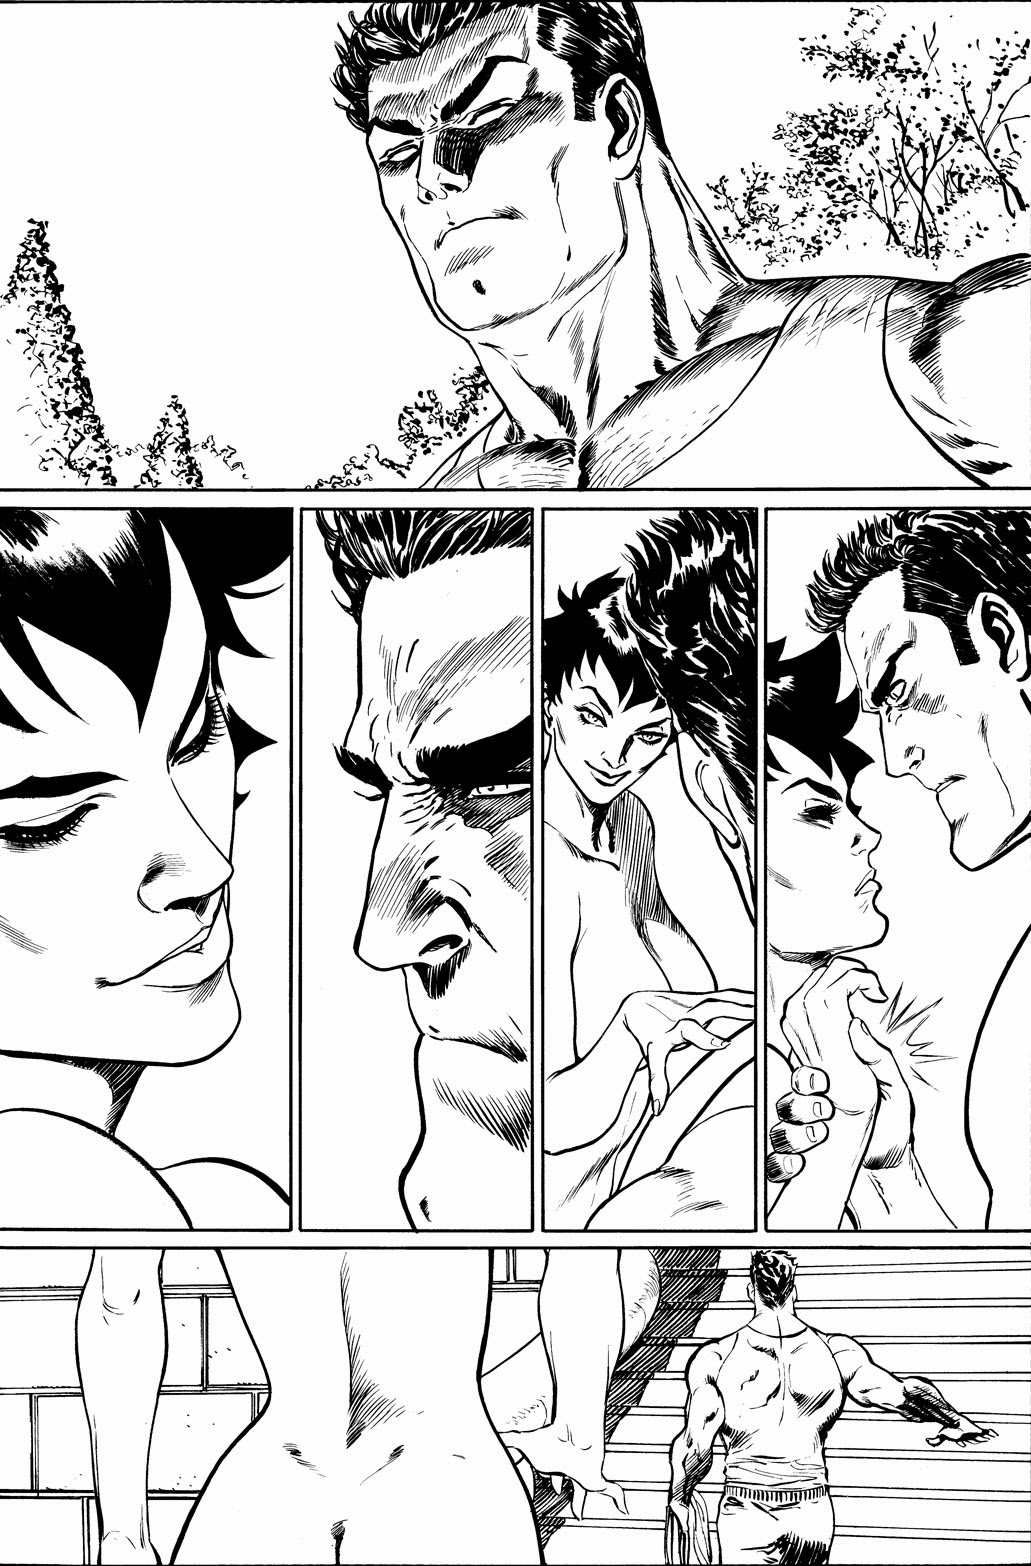 CATWOMAN #04 (more) unseen pages by Guillem March